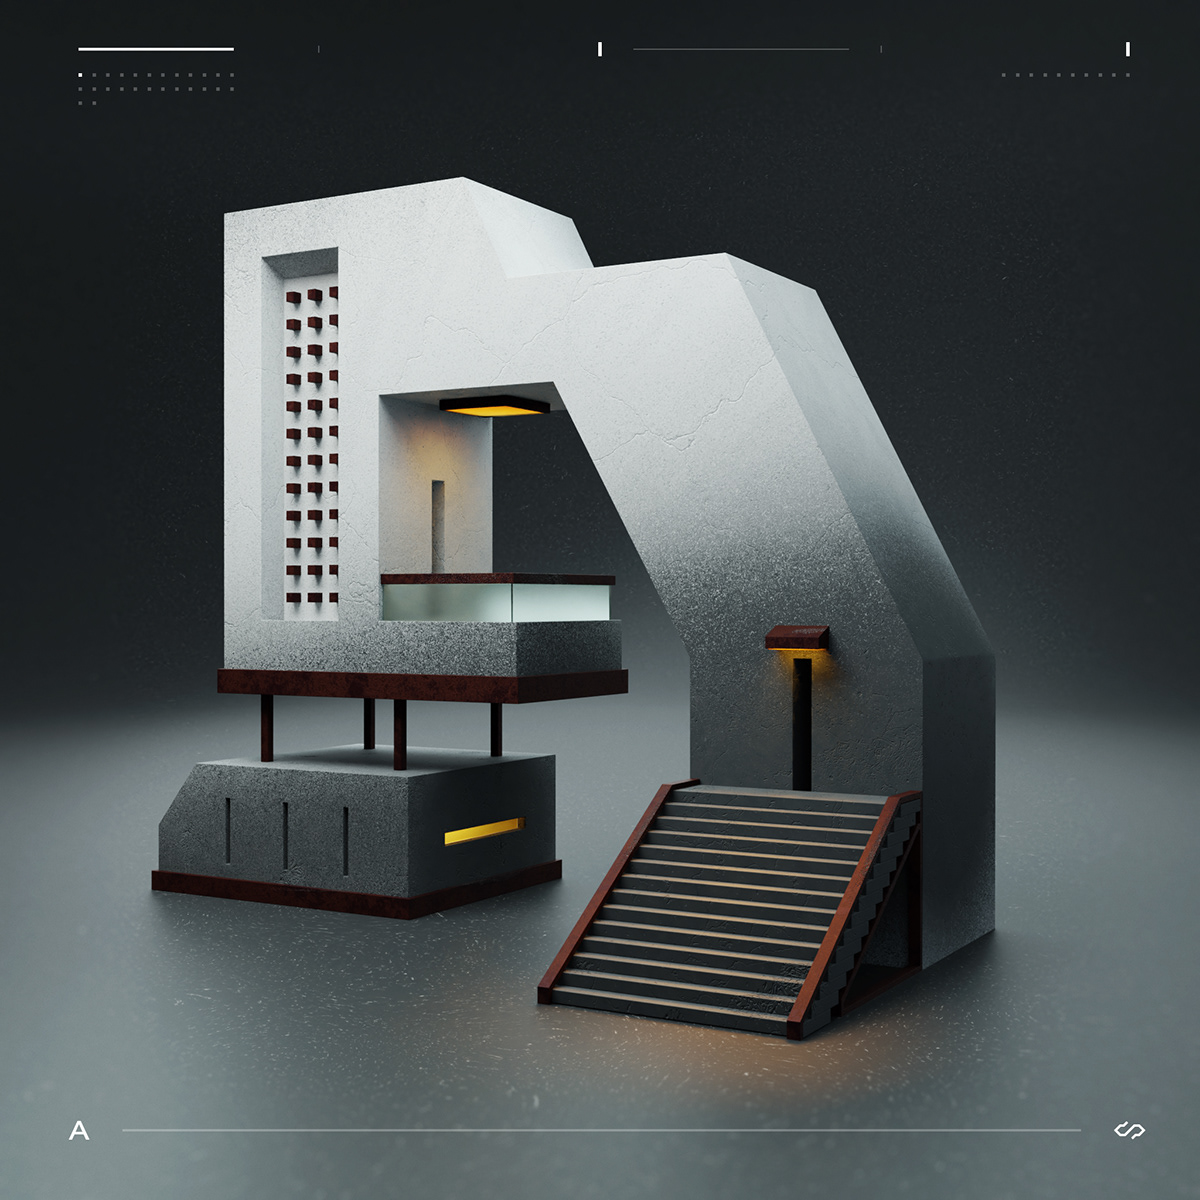 36days 36daysoftype architecture Brutalism concrete grey modeling typography  